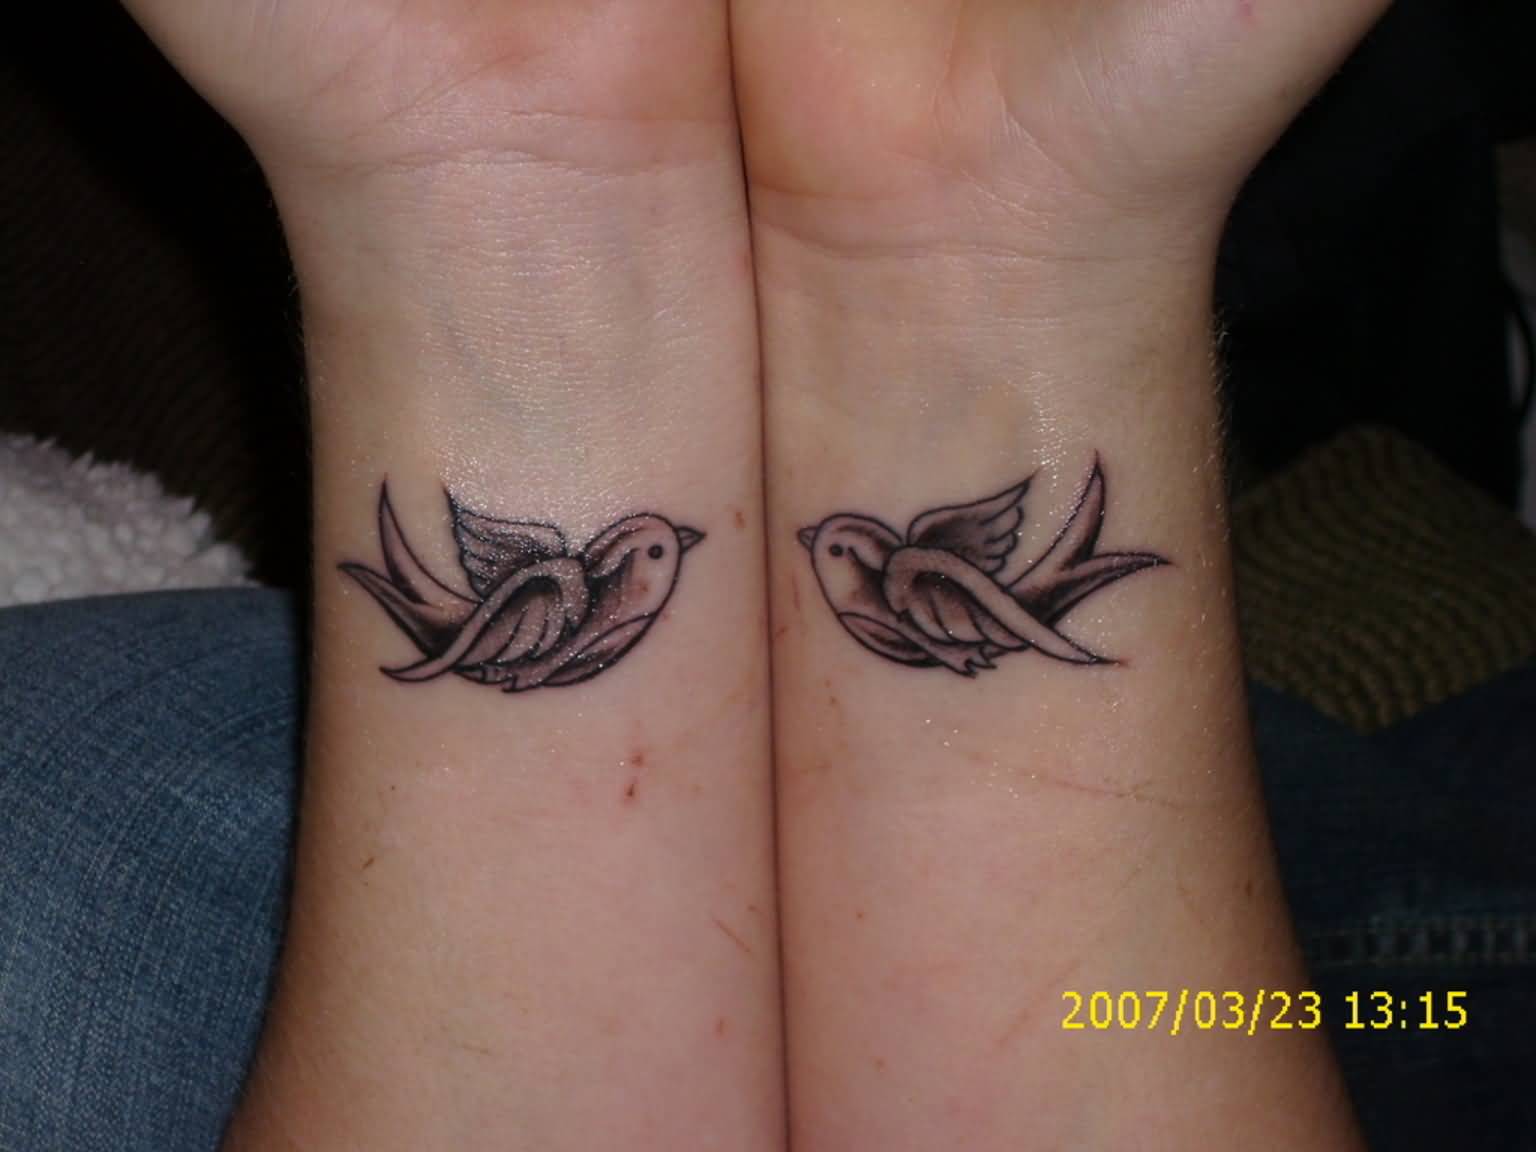 Cute Flying Birds Matching Tattoos On Both Wrists